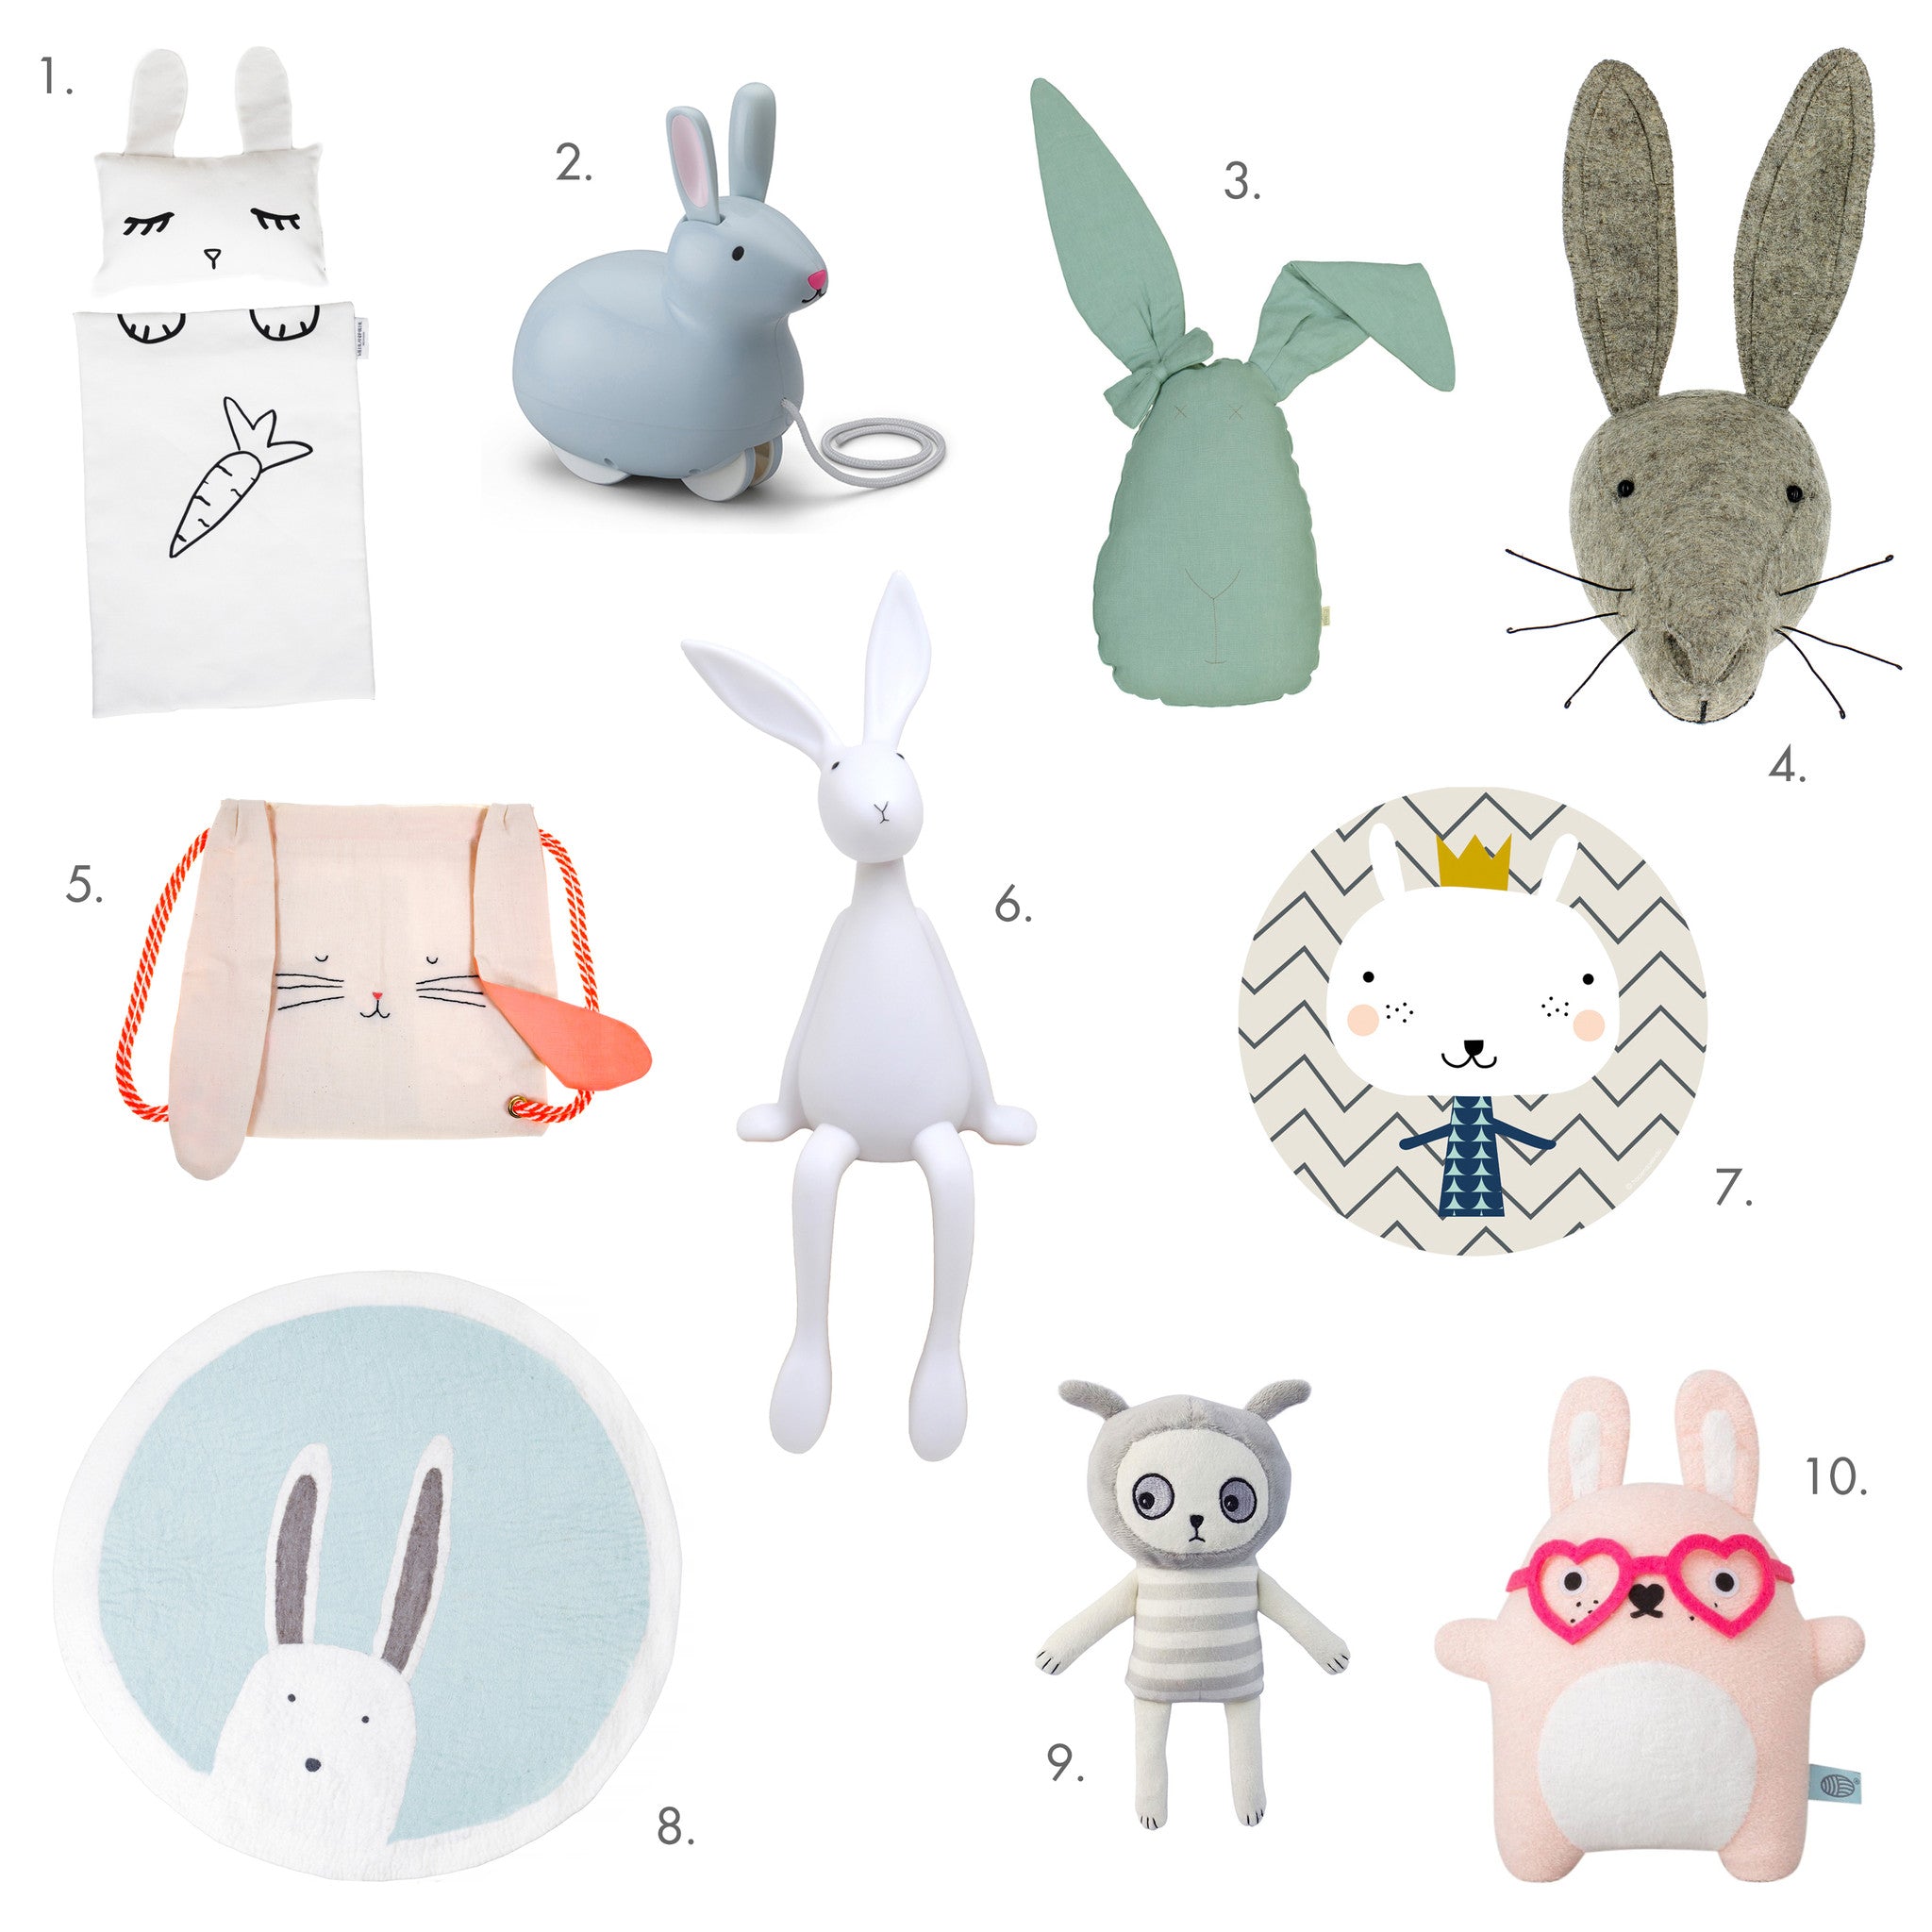 Bunny Rabbit Toys and Accessories from Bobby Rabbit.